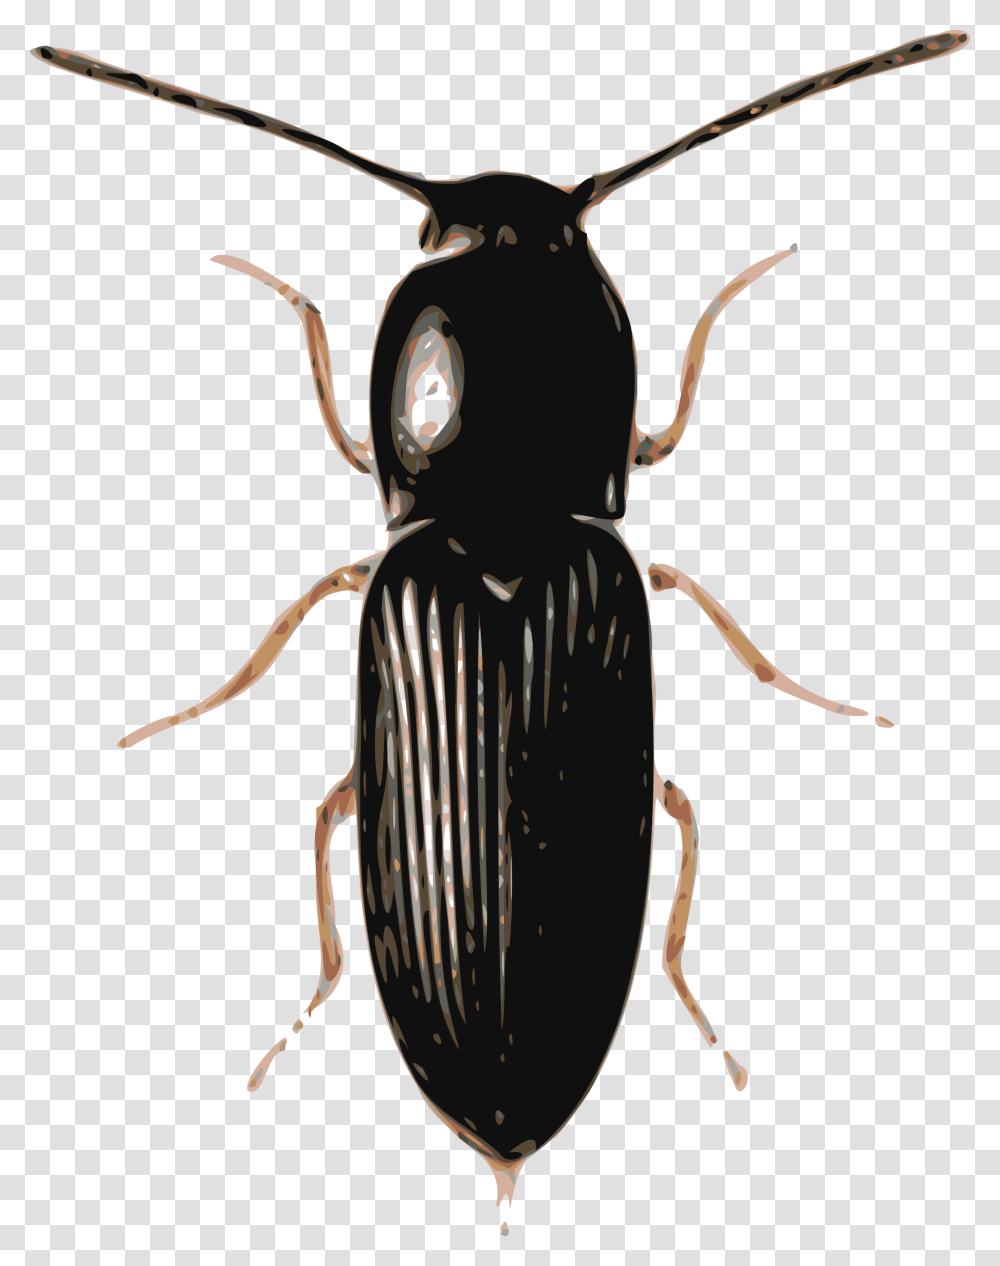 Beetle Beetle Images, Animal, Invertebrate, Insect, Spider Transparent Png